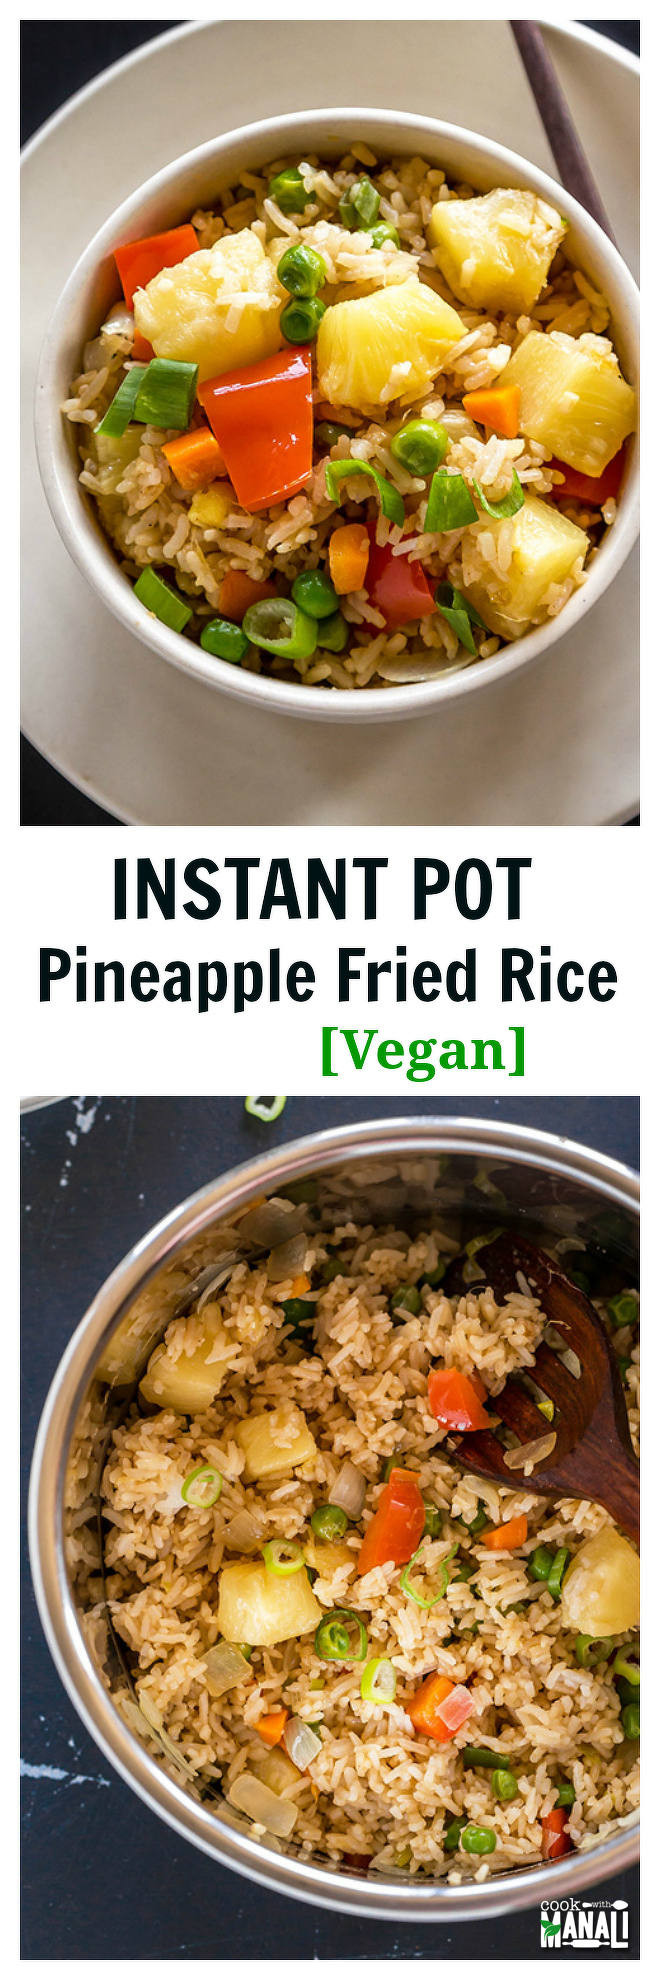 Instant Pot Fried Rice
 Instant Pot Vegan Pineapple Fried Rice Video Cook With